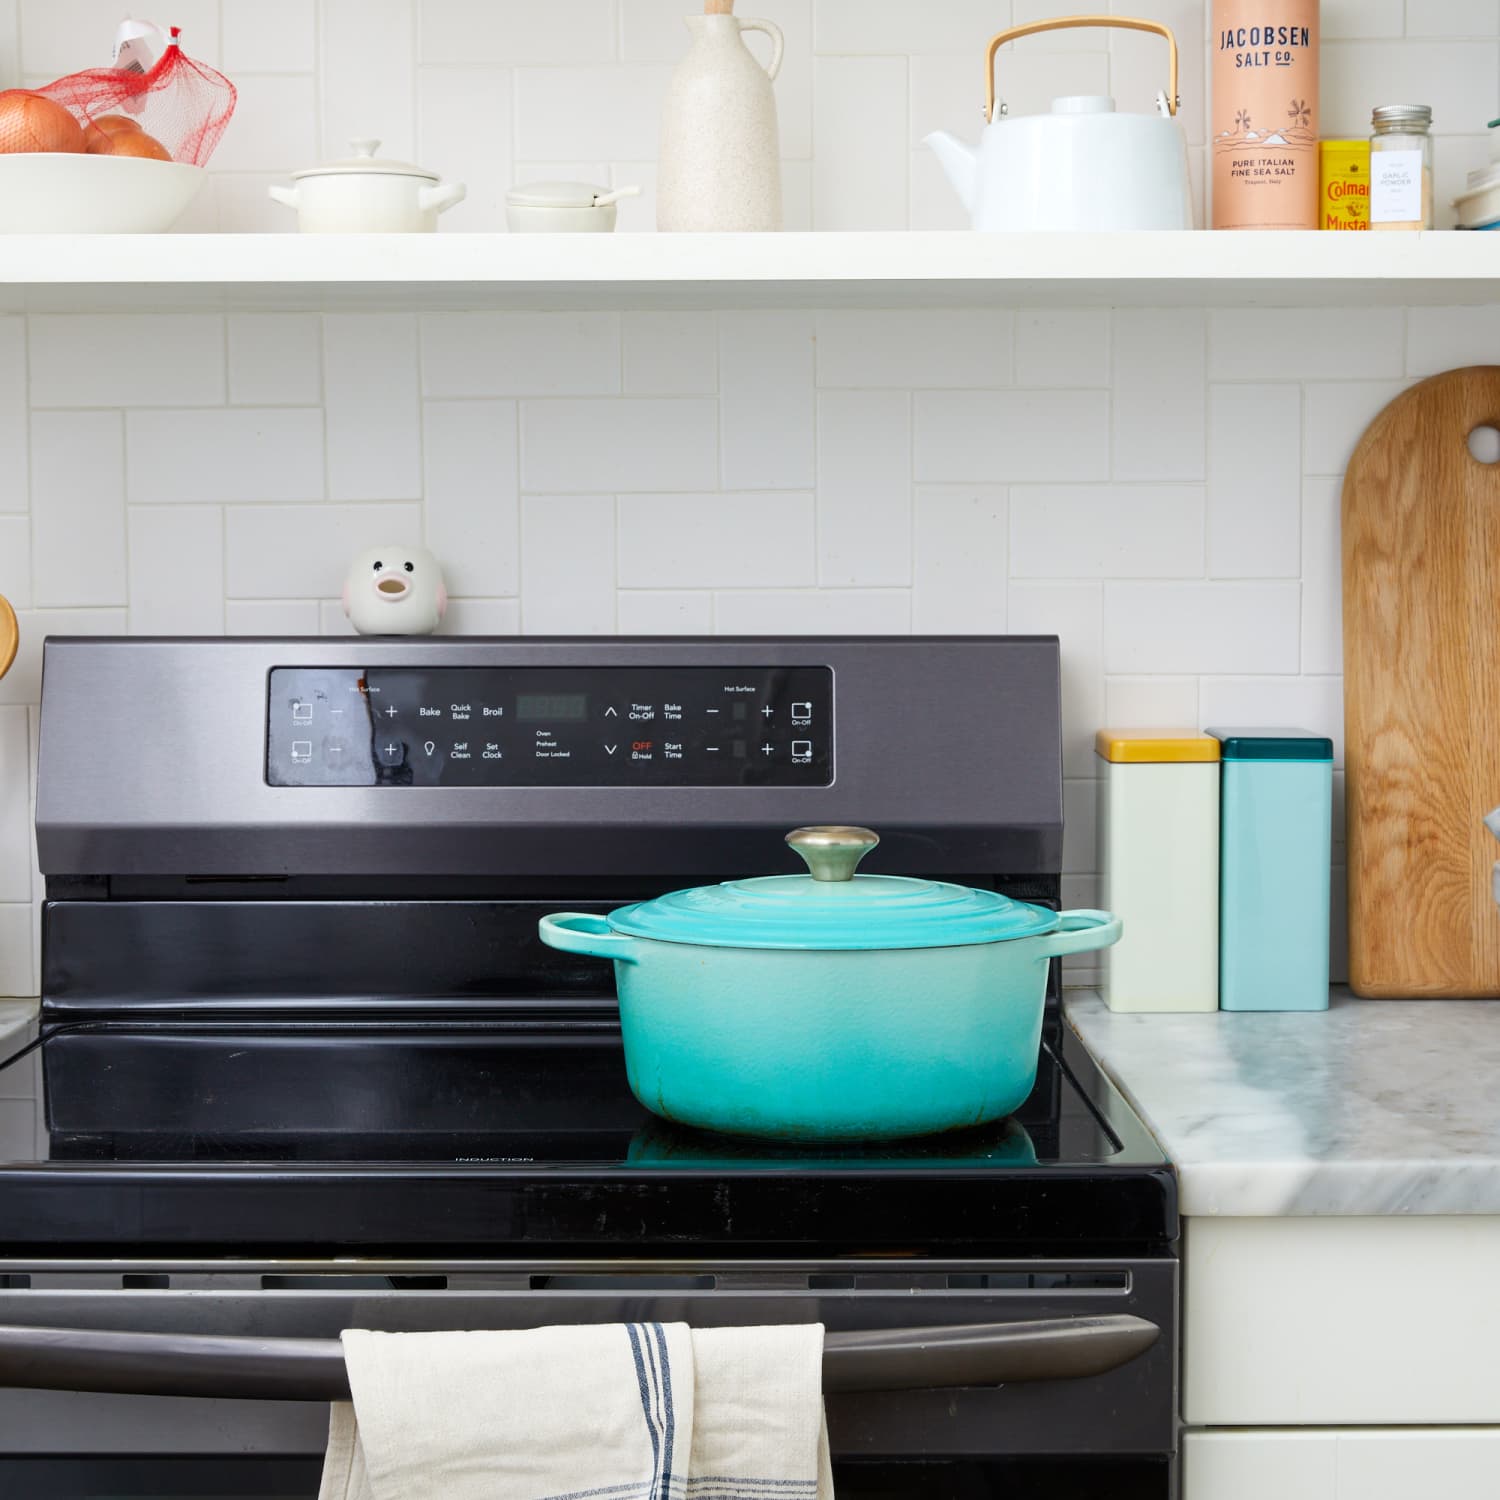 These stove gap covers will keep your kitchen so much cleaner